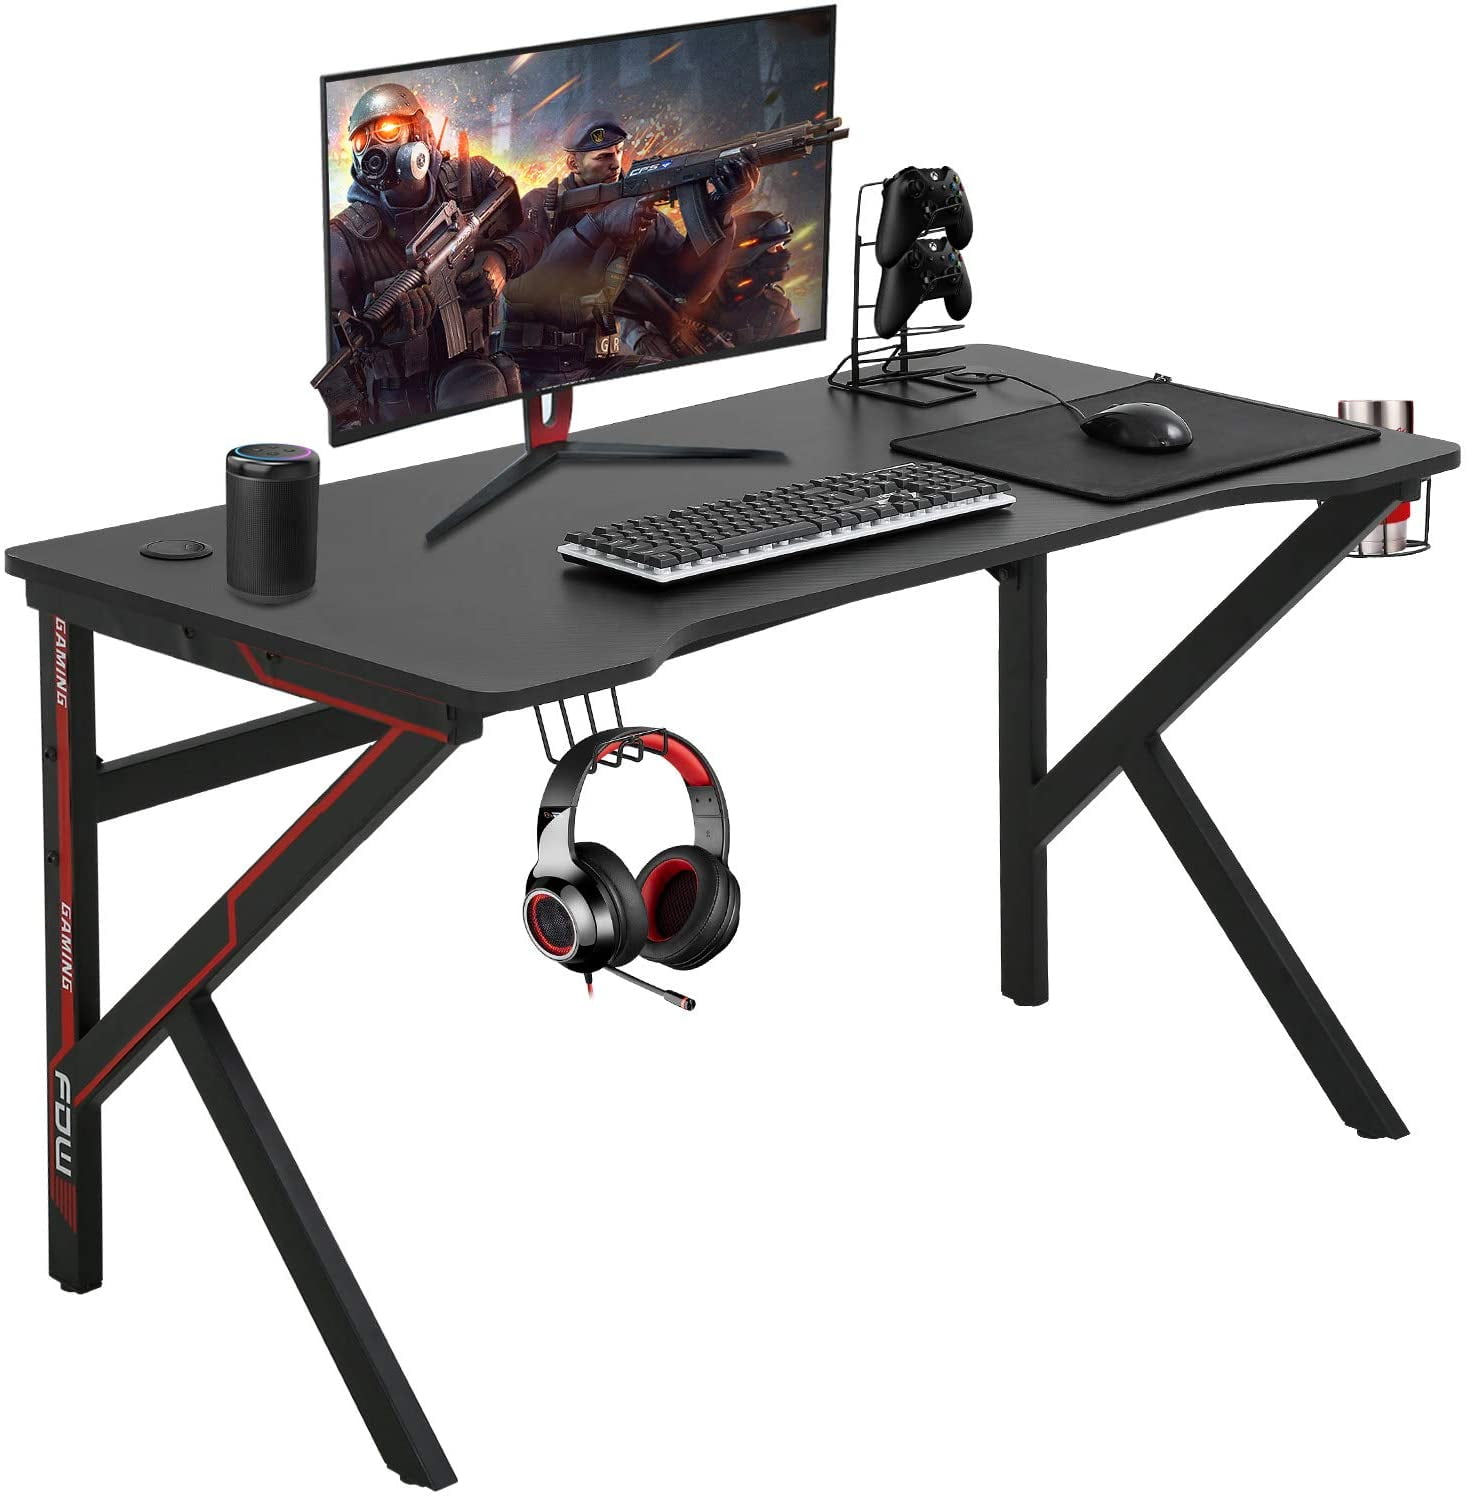 Ergonomic Gaming Desk Computer Table with Headphone Cup Holder Cable Management